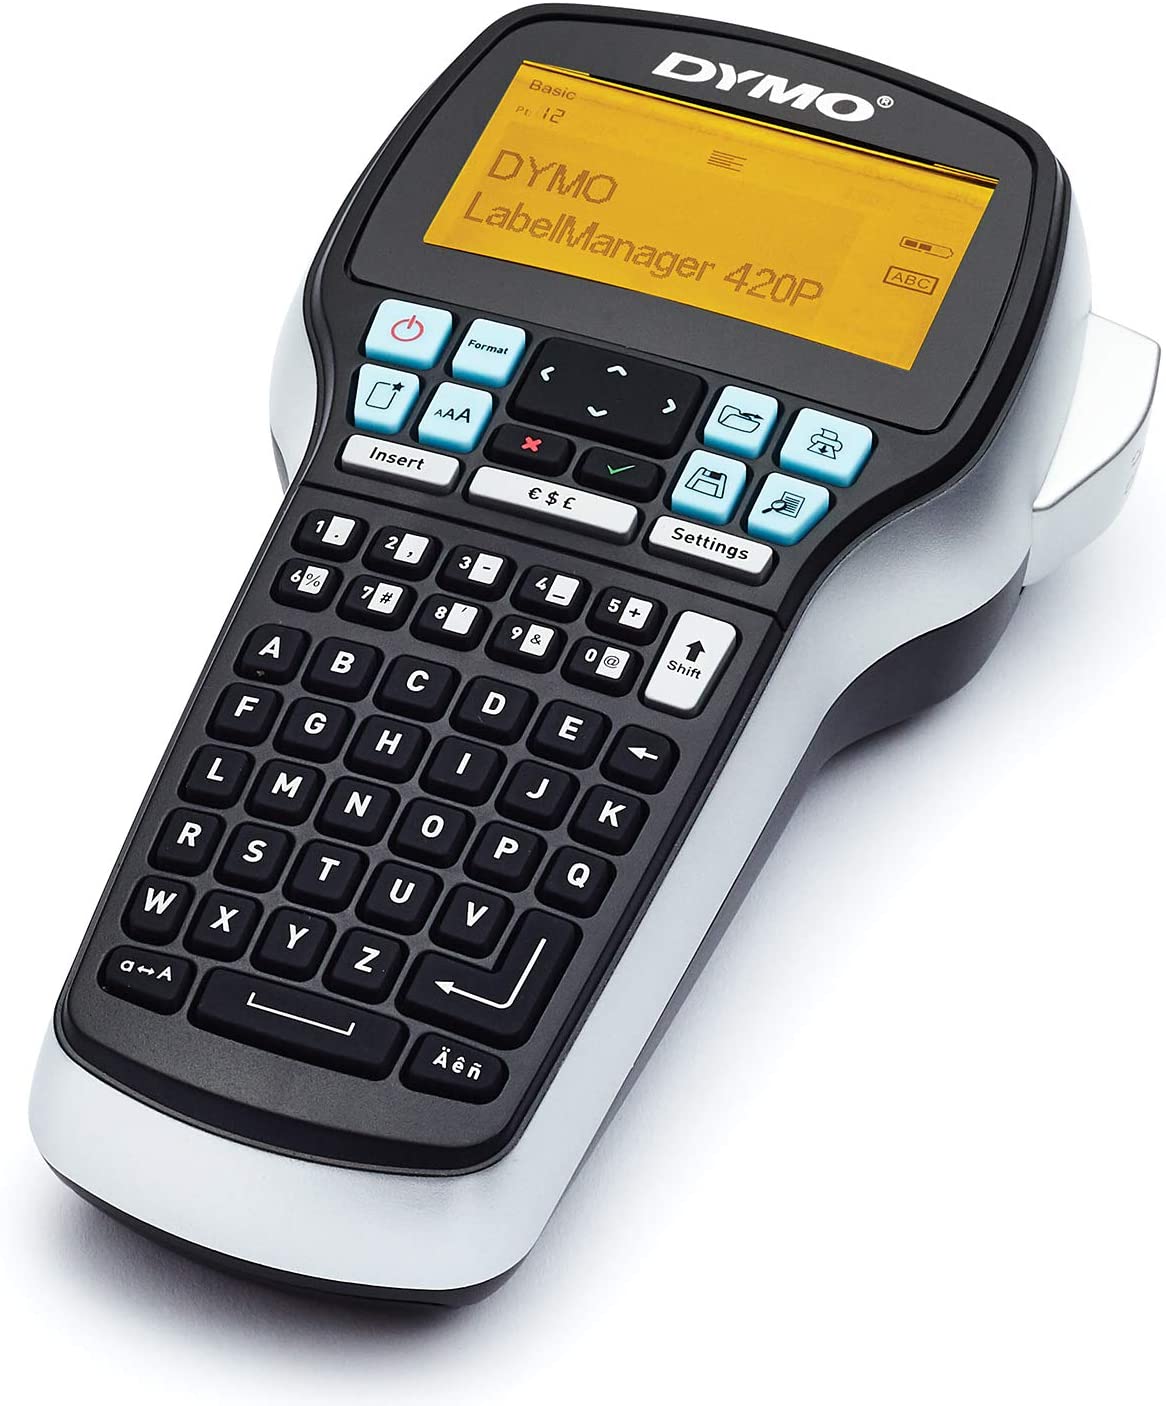 DYMO LabelManager 420P High Performance Rechargeable Portable Label Maker Kit, ABC Keyboard with 4 Rolls of D1 Labels & Carrying Case